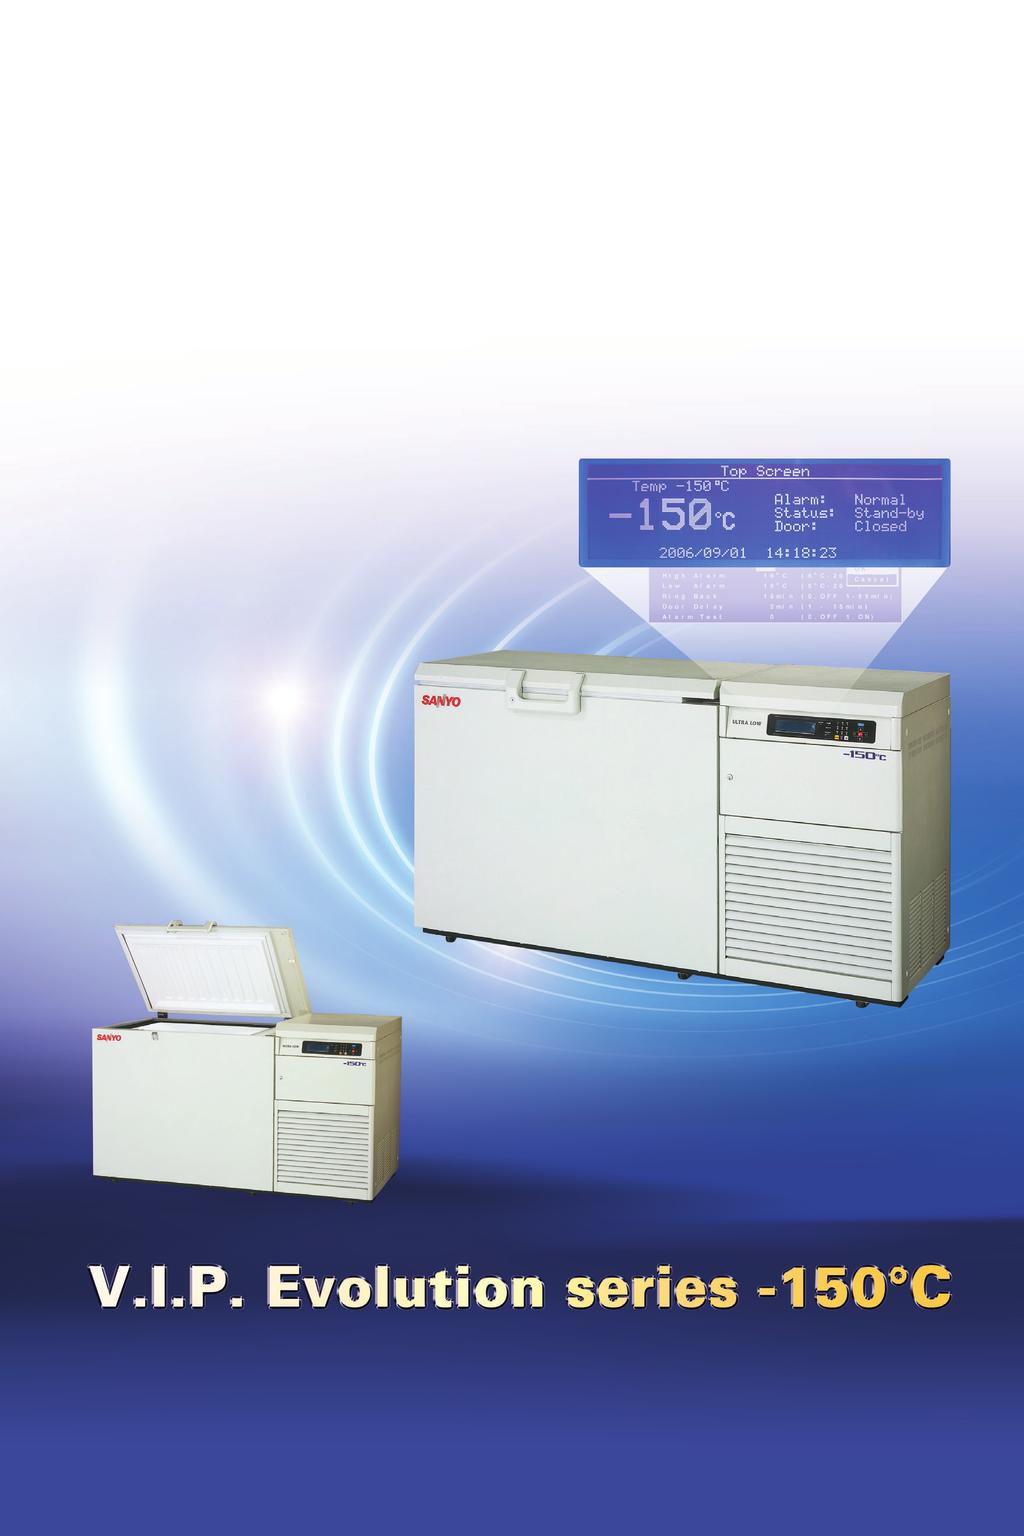 The temperature inside the freezer can be set and monitored easily by means of precise microprocessor temperature control with an LCD graphic display.